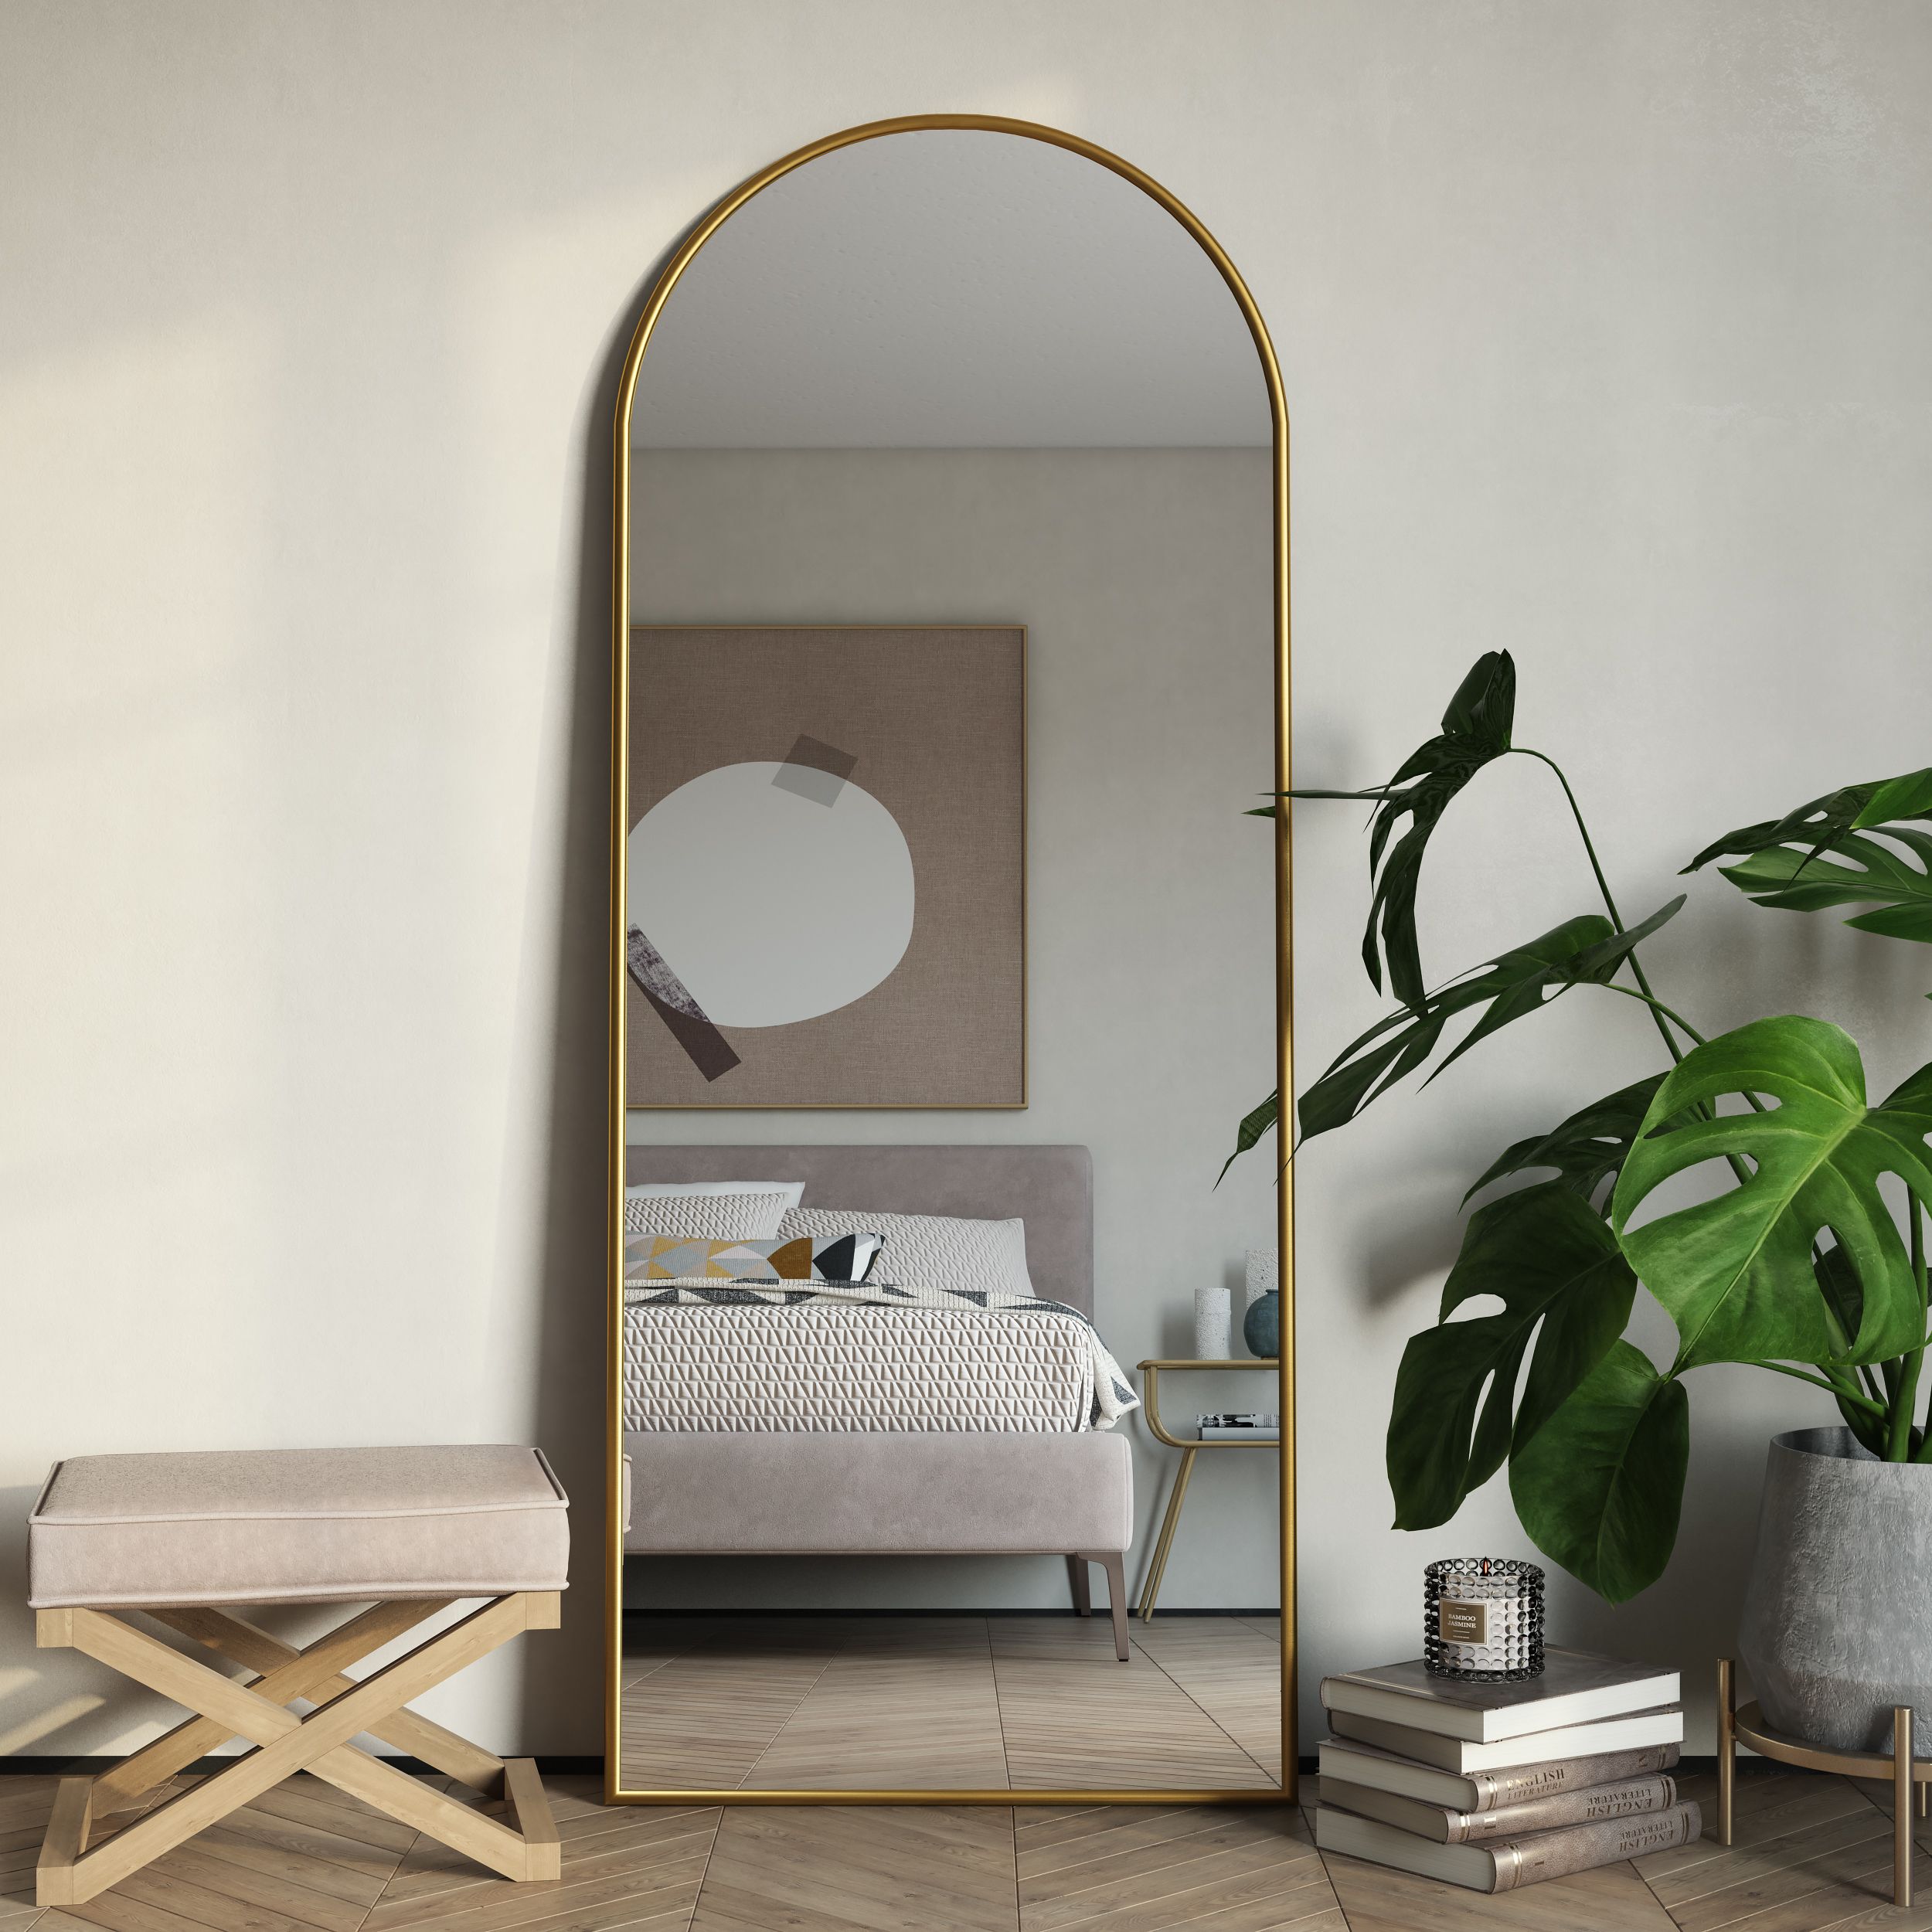 Mirror for the Illusion of a Spacious Bedroom